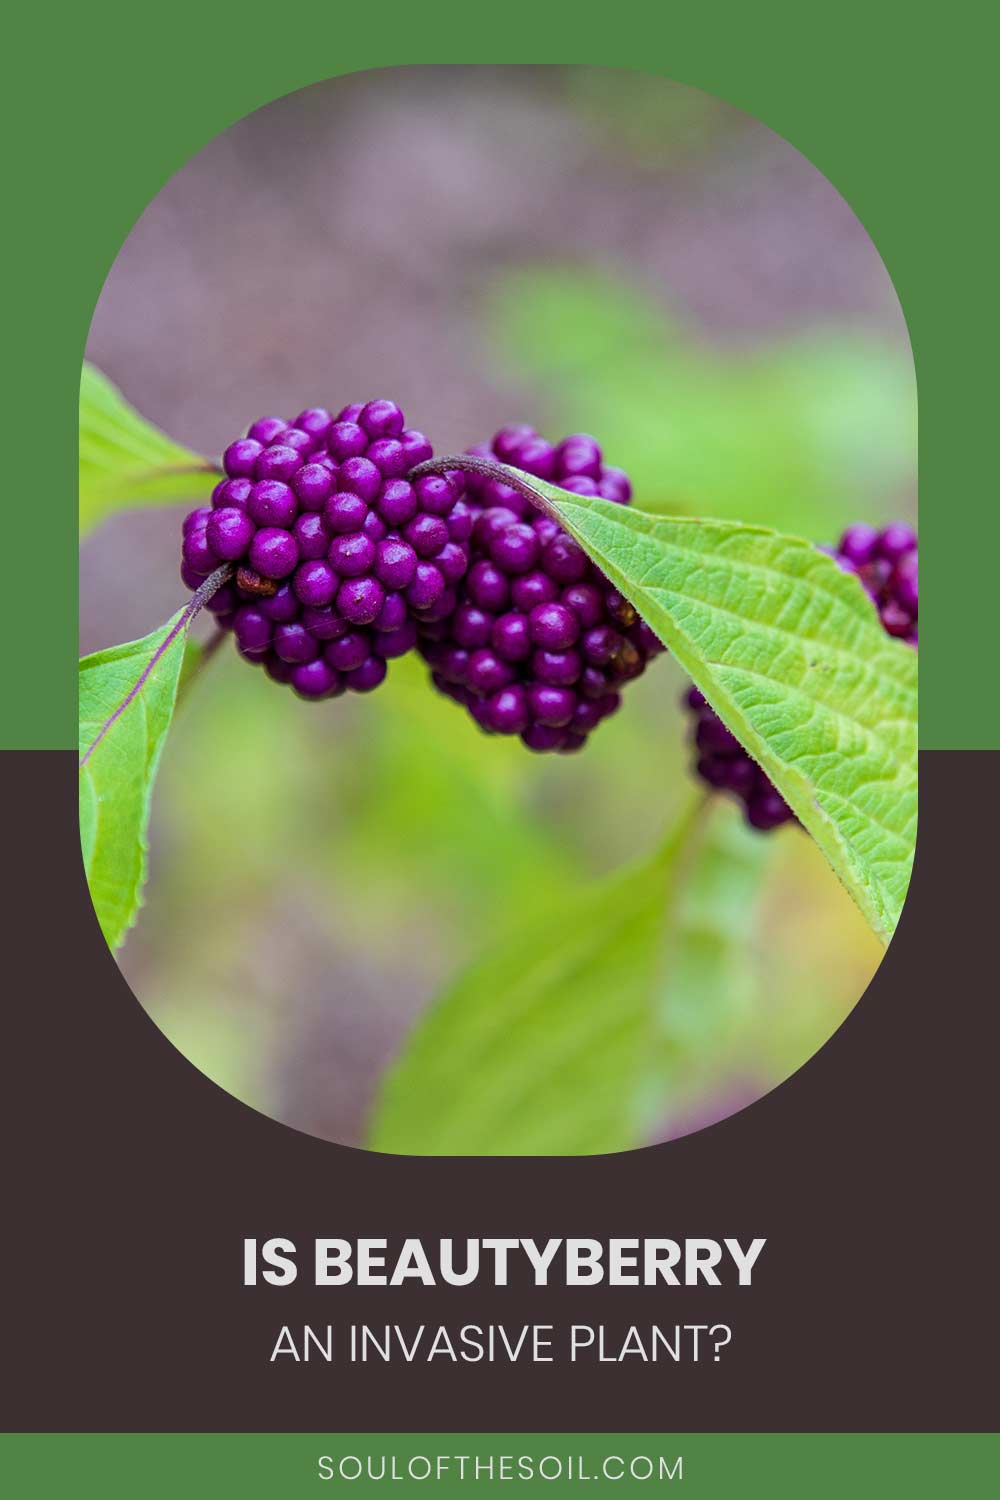 Beautyberries on a plant - Is it an invasive plant?